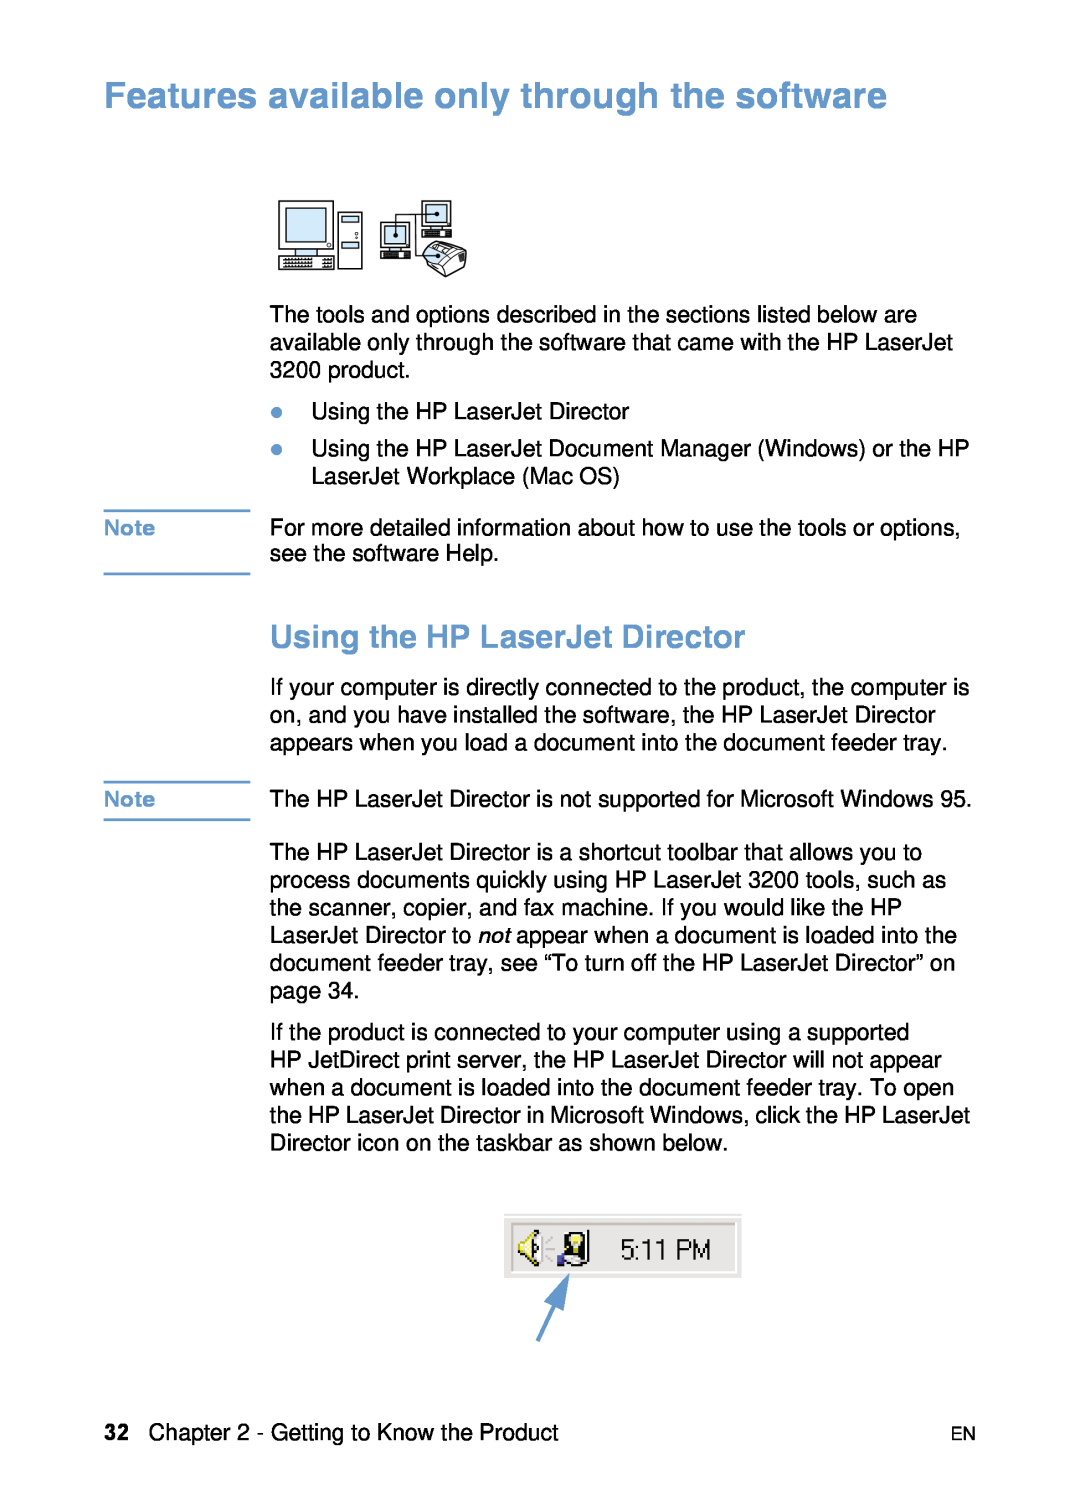 HP 3200 manual Features available only through the software, Using the HP LaserJet Director 